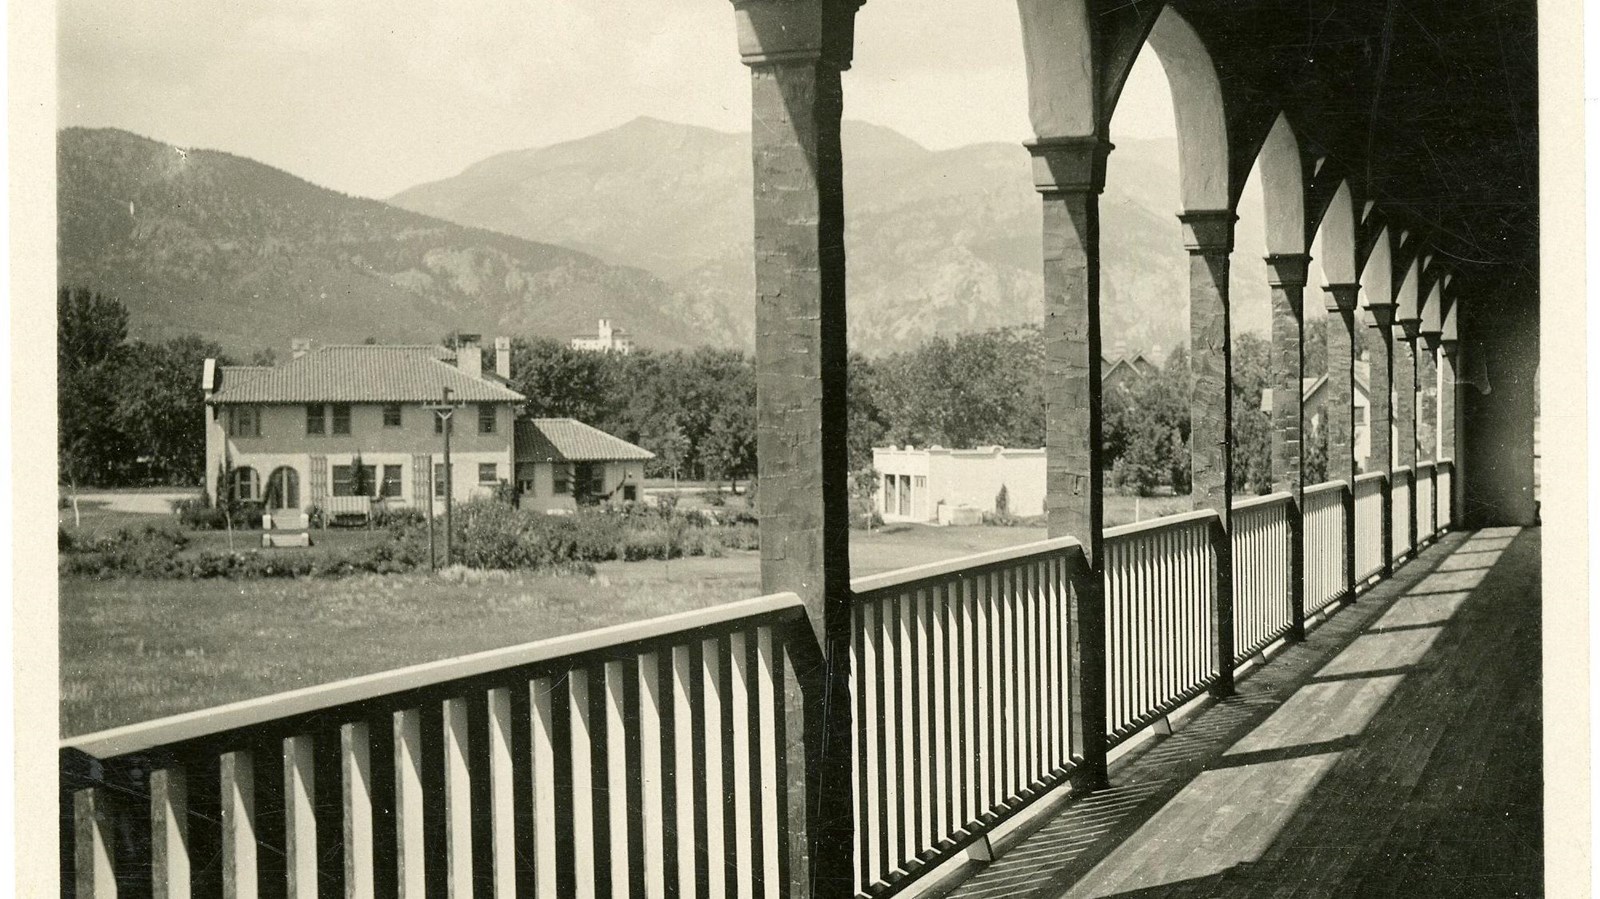 Black and white of balcony lined with arches looking out on grassy area, house, and mountains